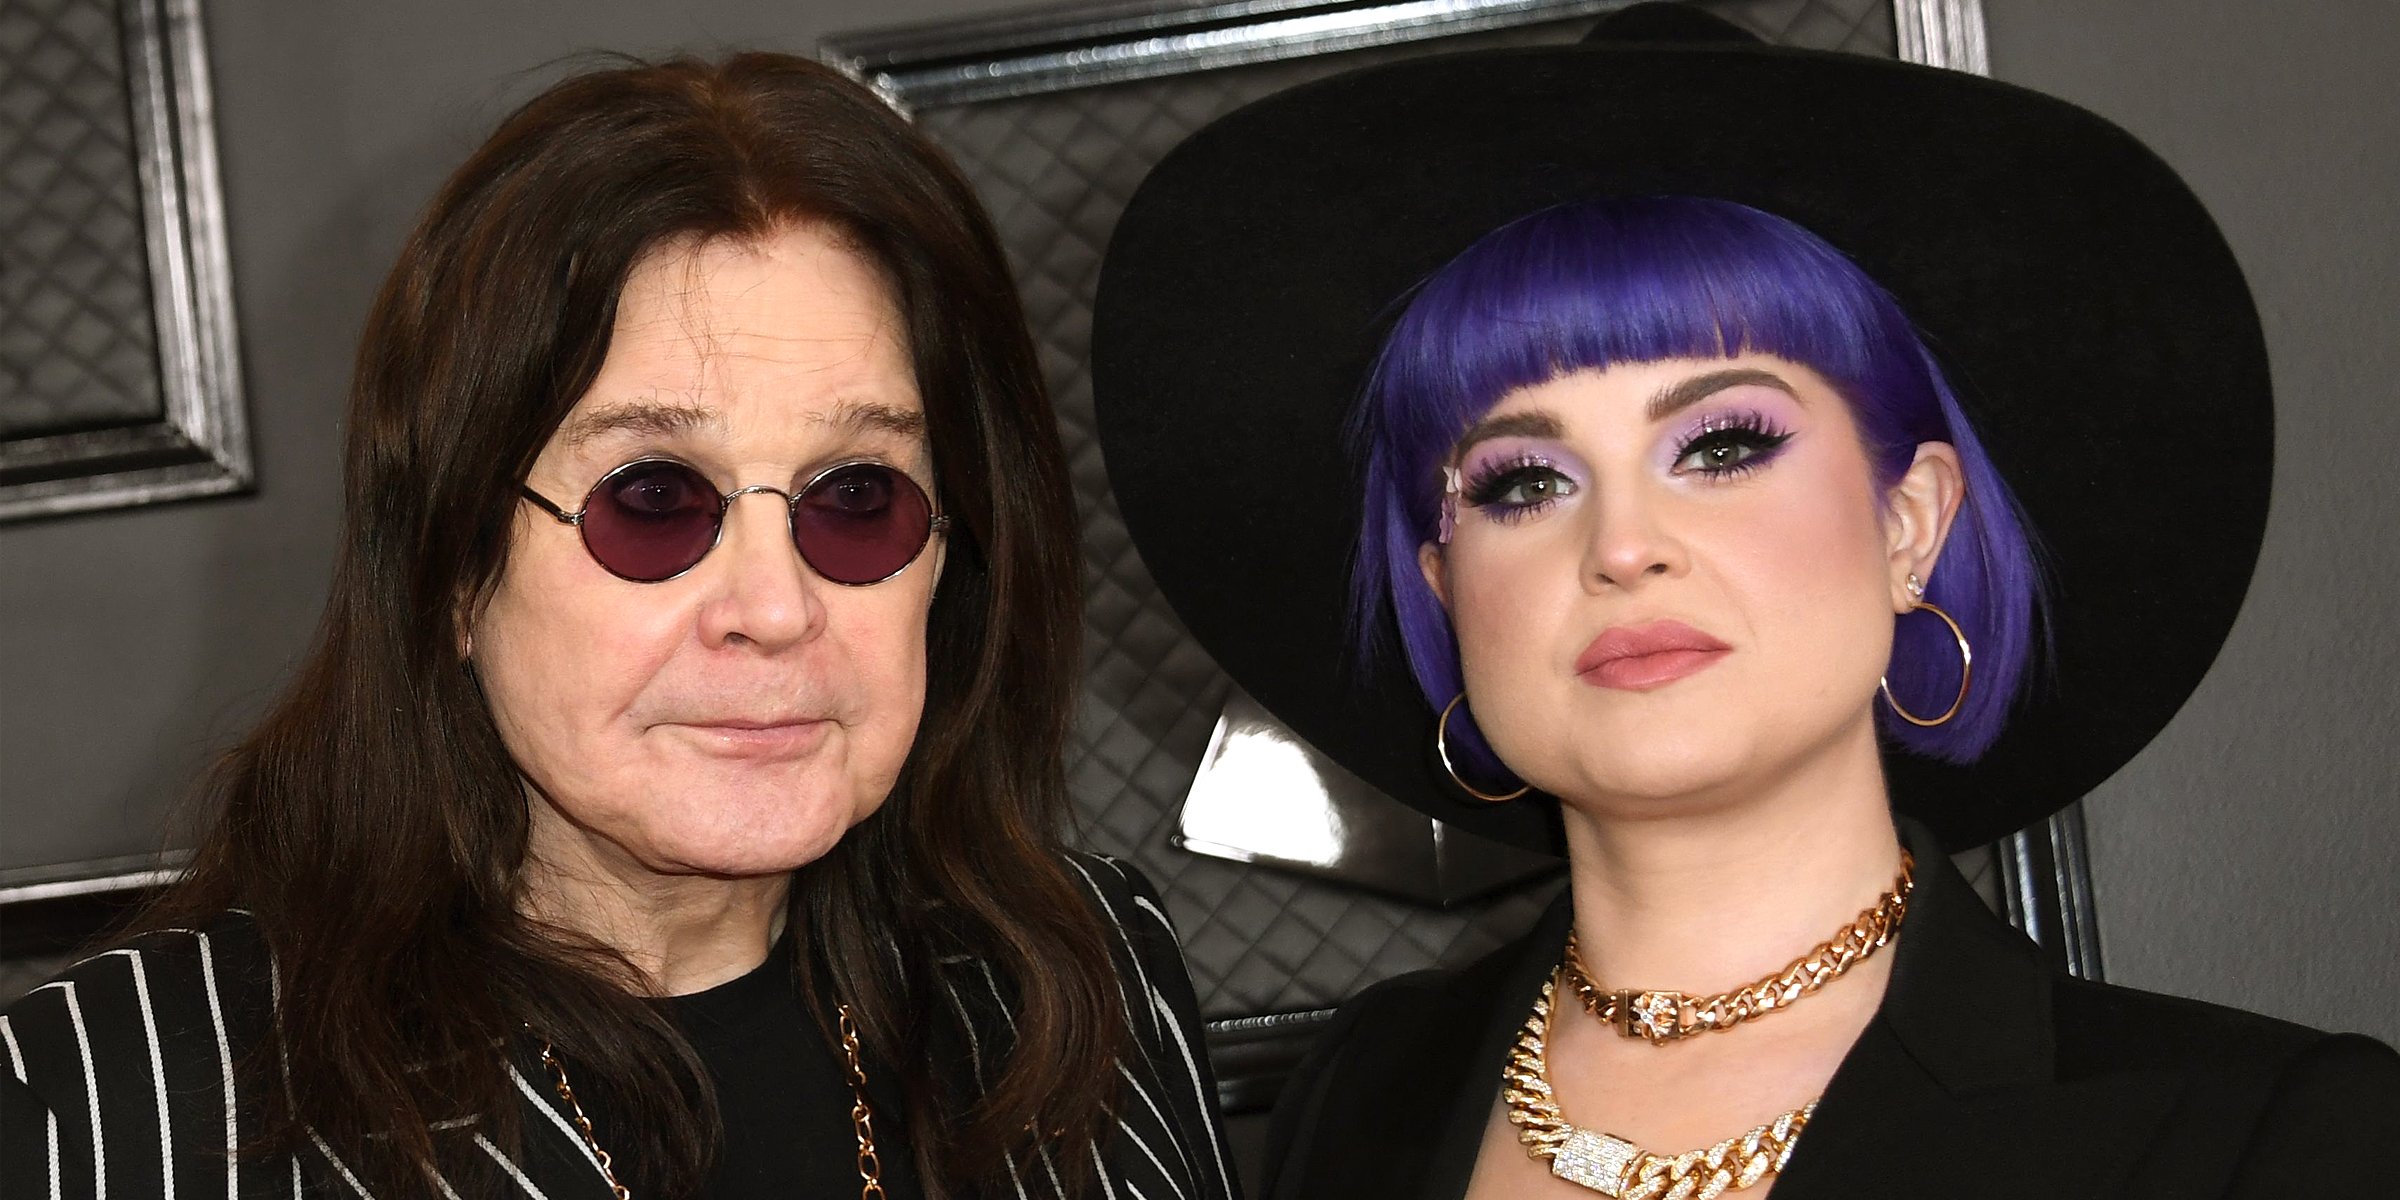 Ozzy and Kelly Osbourne┃Source: Getty Images